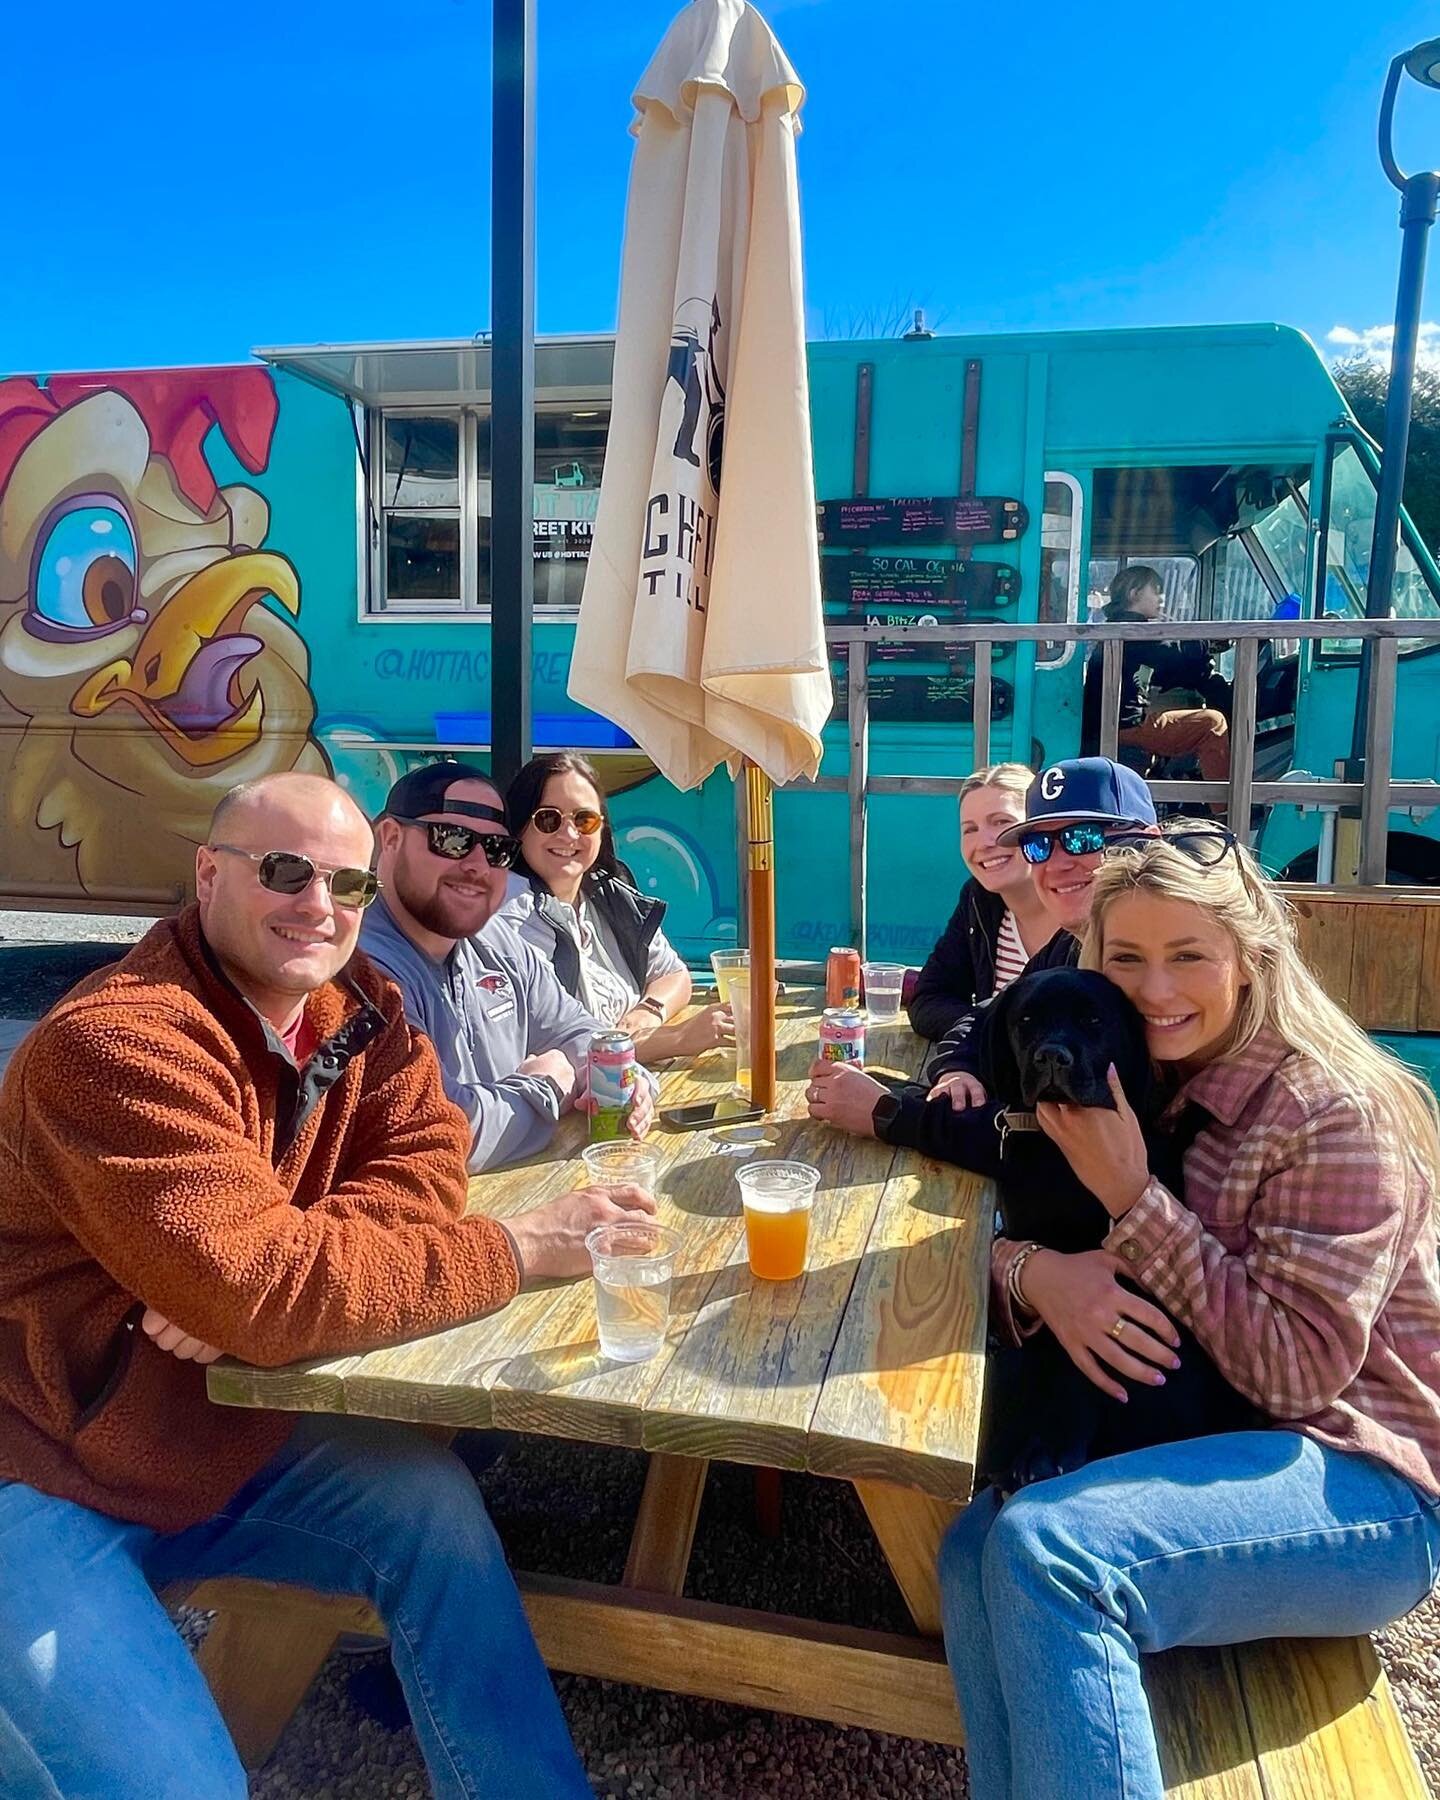 Saturdays are BEST spent with friends 😁☀️

Join us for brunch PLUS three delicious food trucks today 🤤

🔹SATURDAY 4/8🔹
☕️ @alvariumroasting &bull; 7am-3pm
🥖 @smallstate &bull; 8am-2pm
🍻 Bar &bull; 11am-9pm (Brunch &bull; 11am-2pm | Happy Hour &